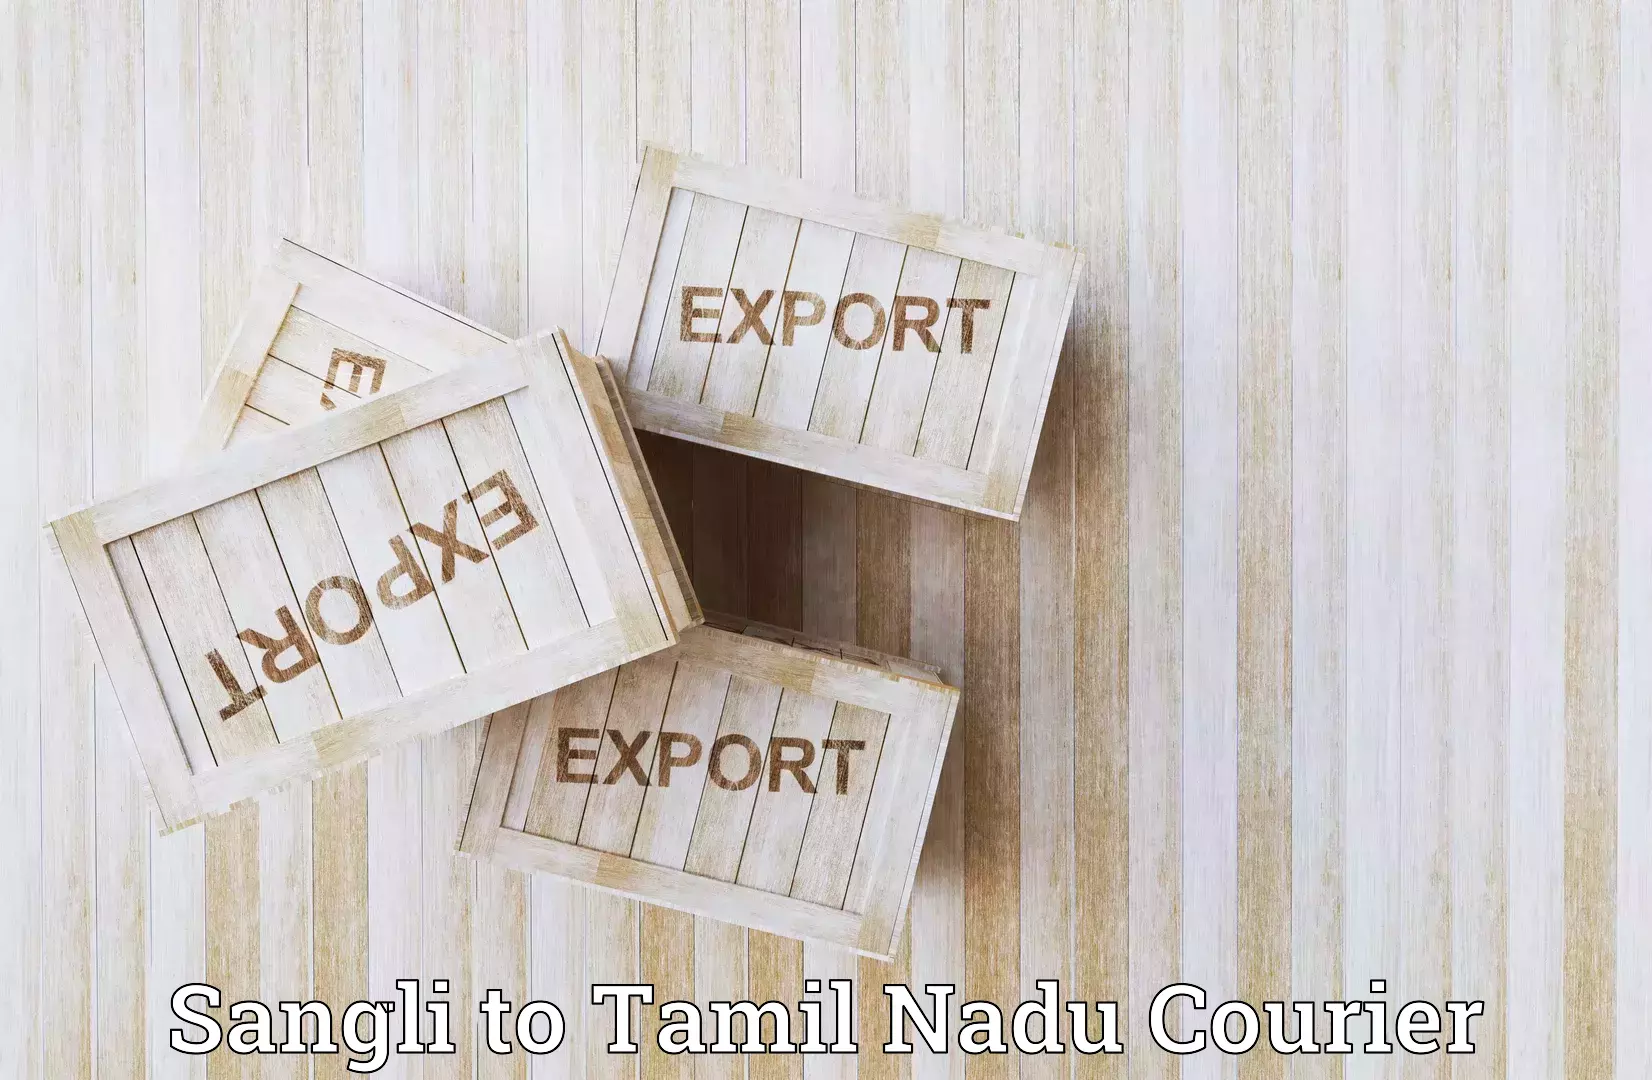 Online courier booking Sangli to Anthiyur